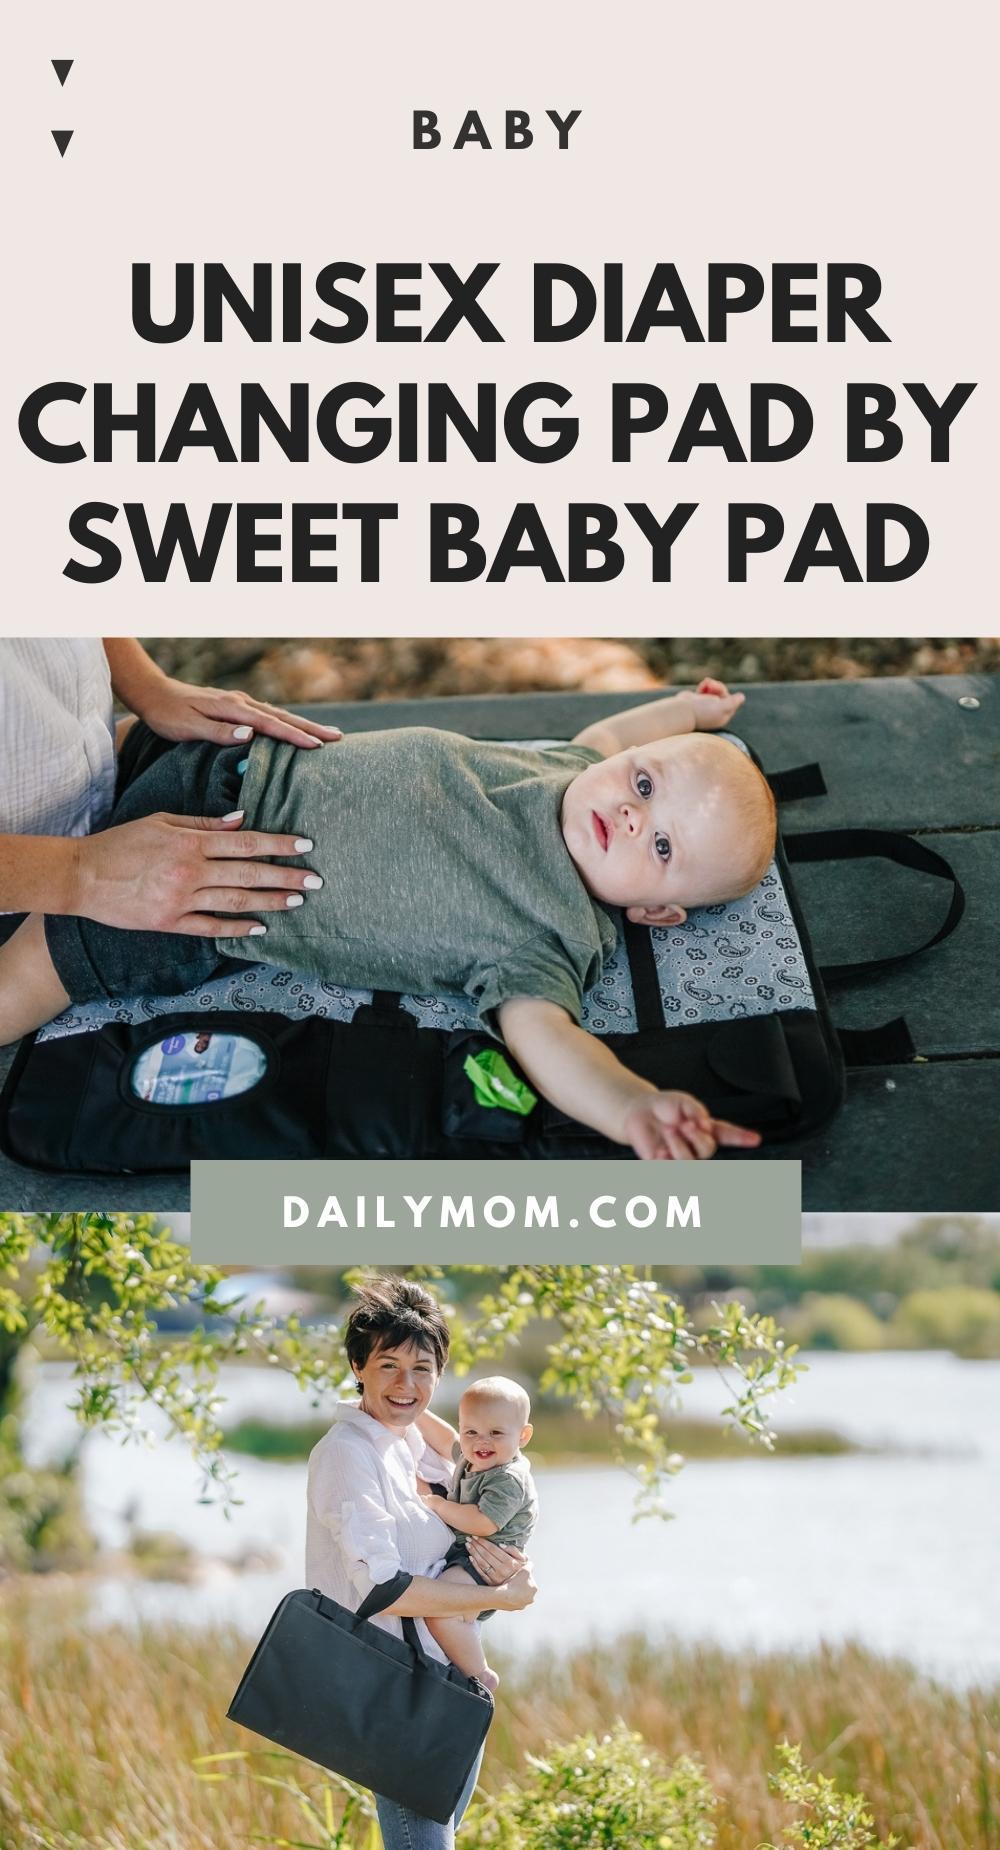 New Kickstarter: Diaper Changing Pad By Sweet Baby Pad